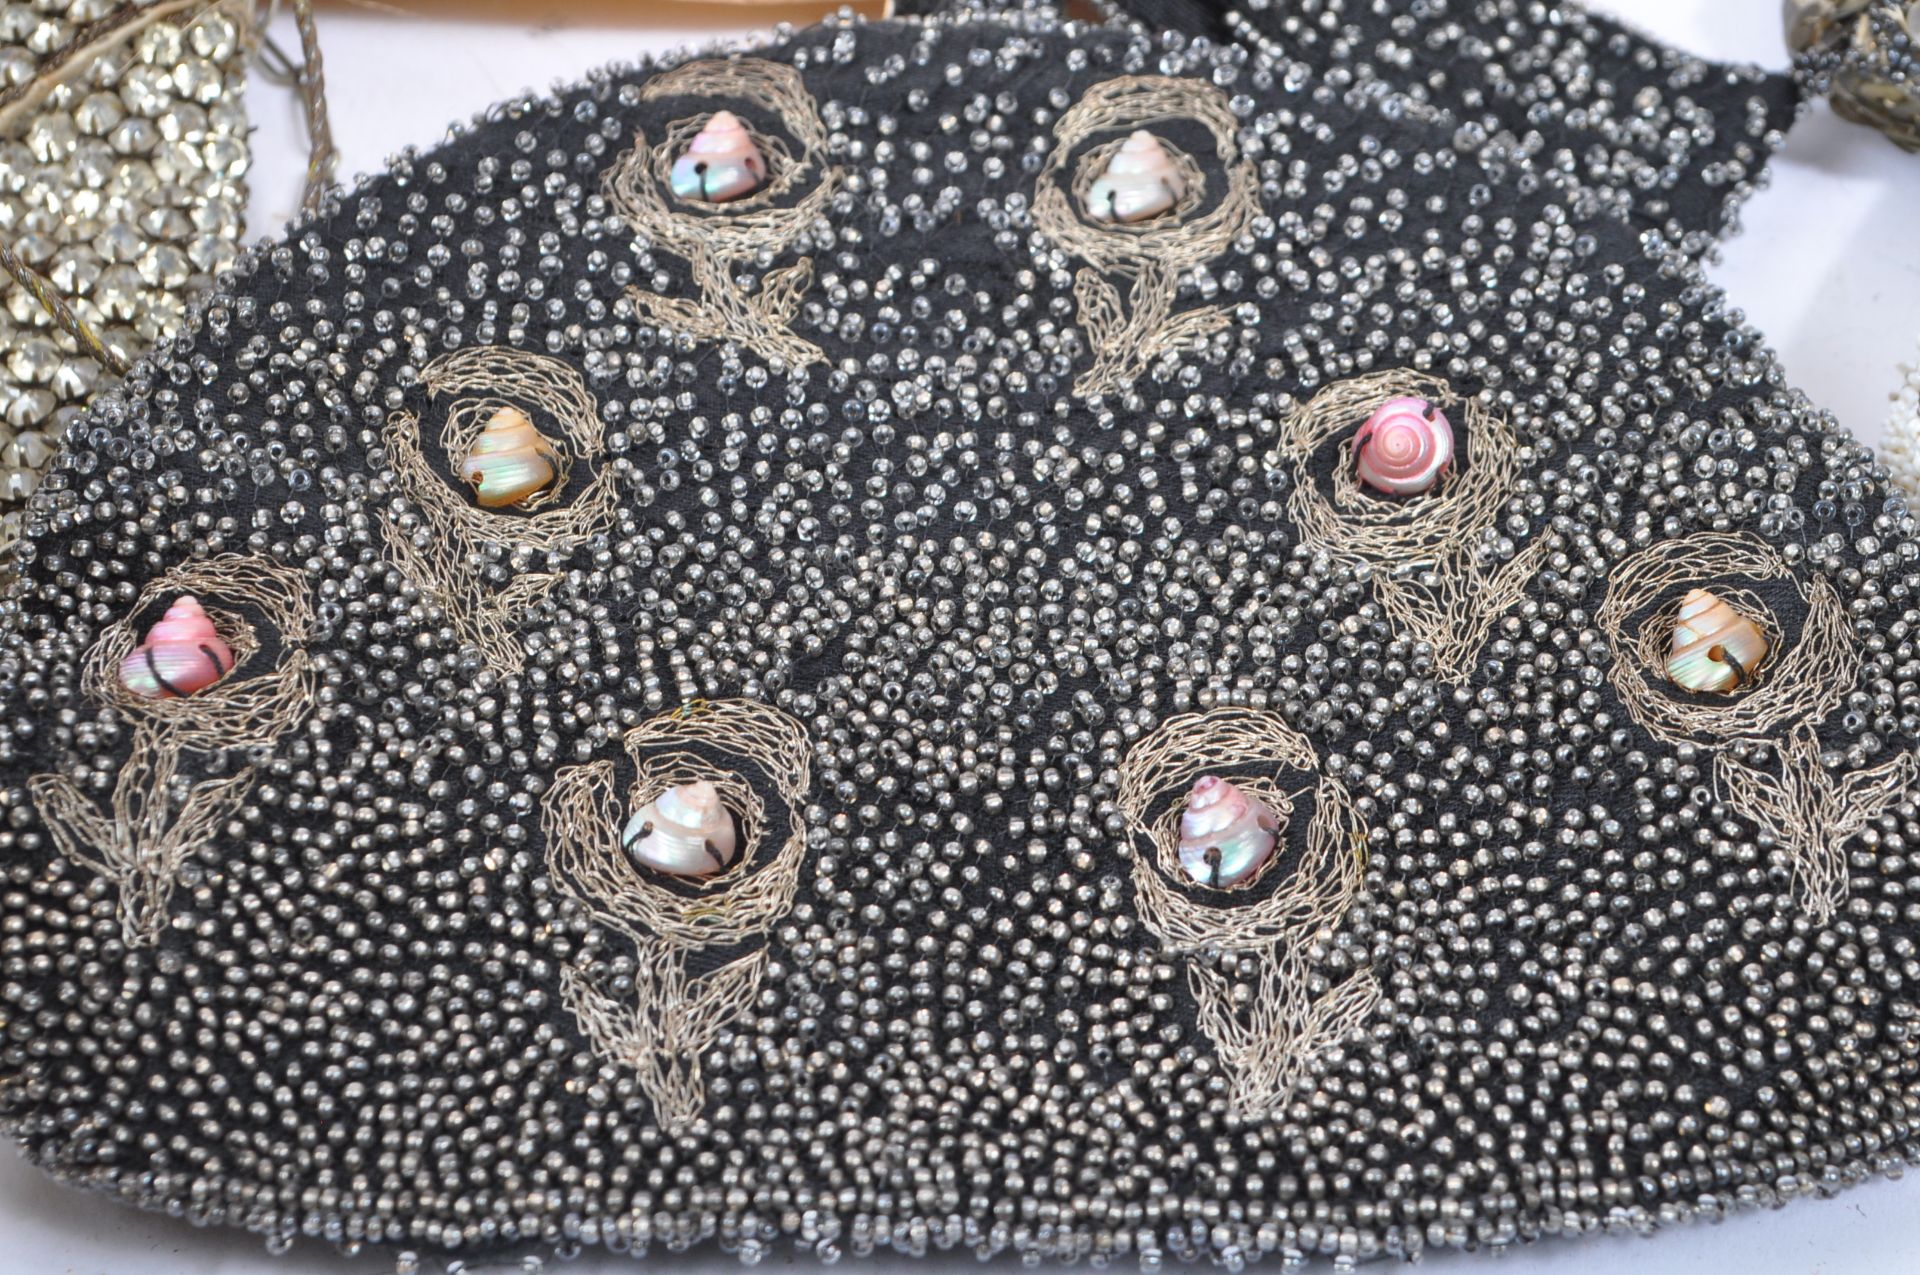 COLLECTION OF VINTAGE 1930S FASHION HANDBAGS AND PURSES - Image 13 of 16